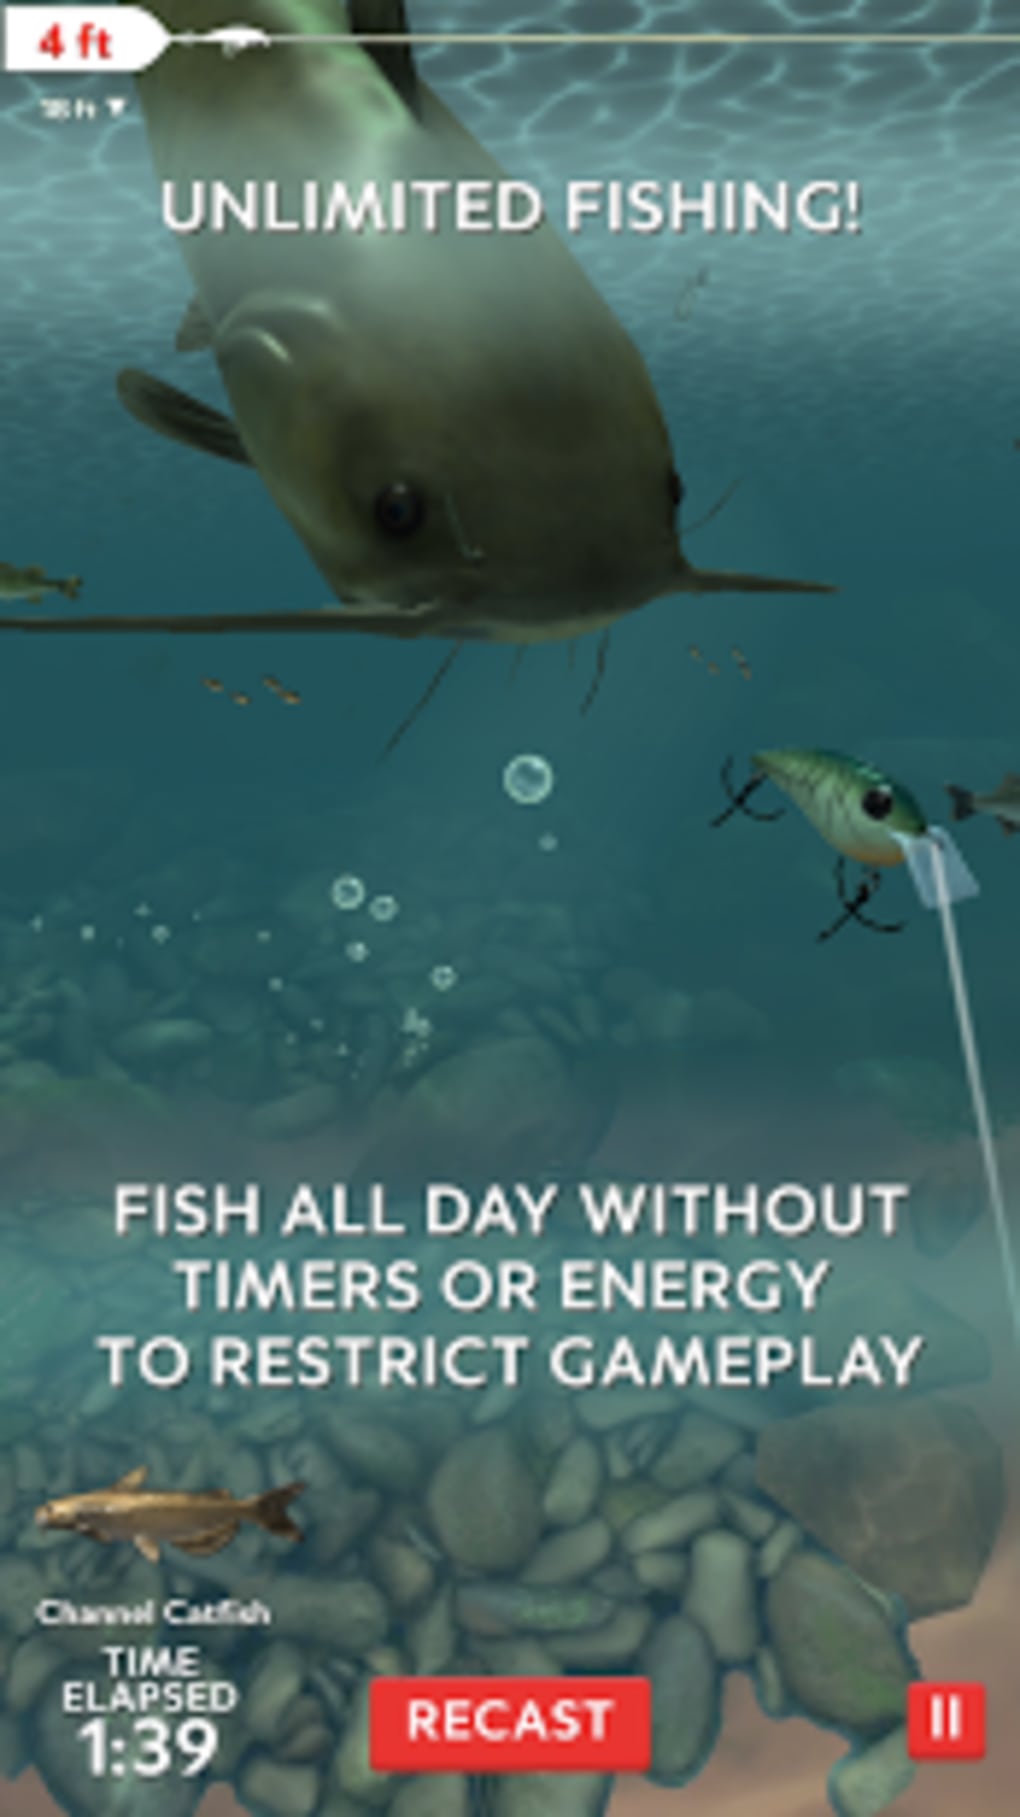 Rapala Fishing - Daily Catch - APK Download for Android